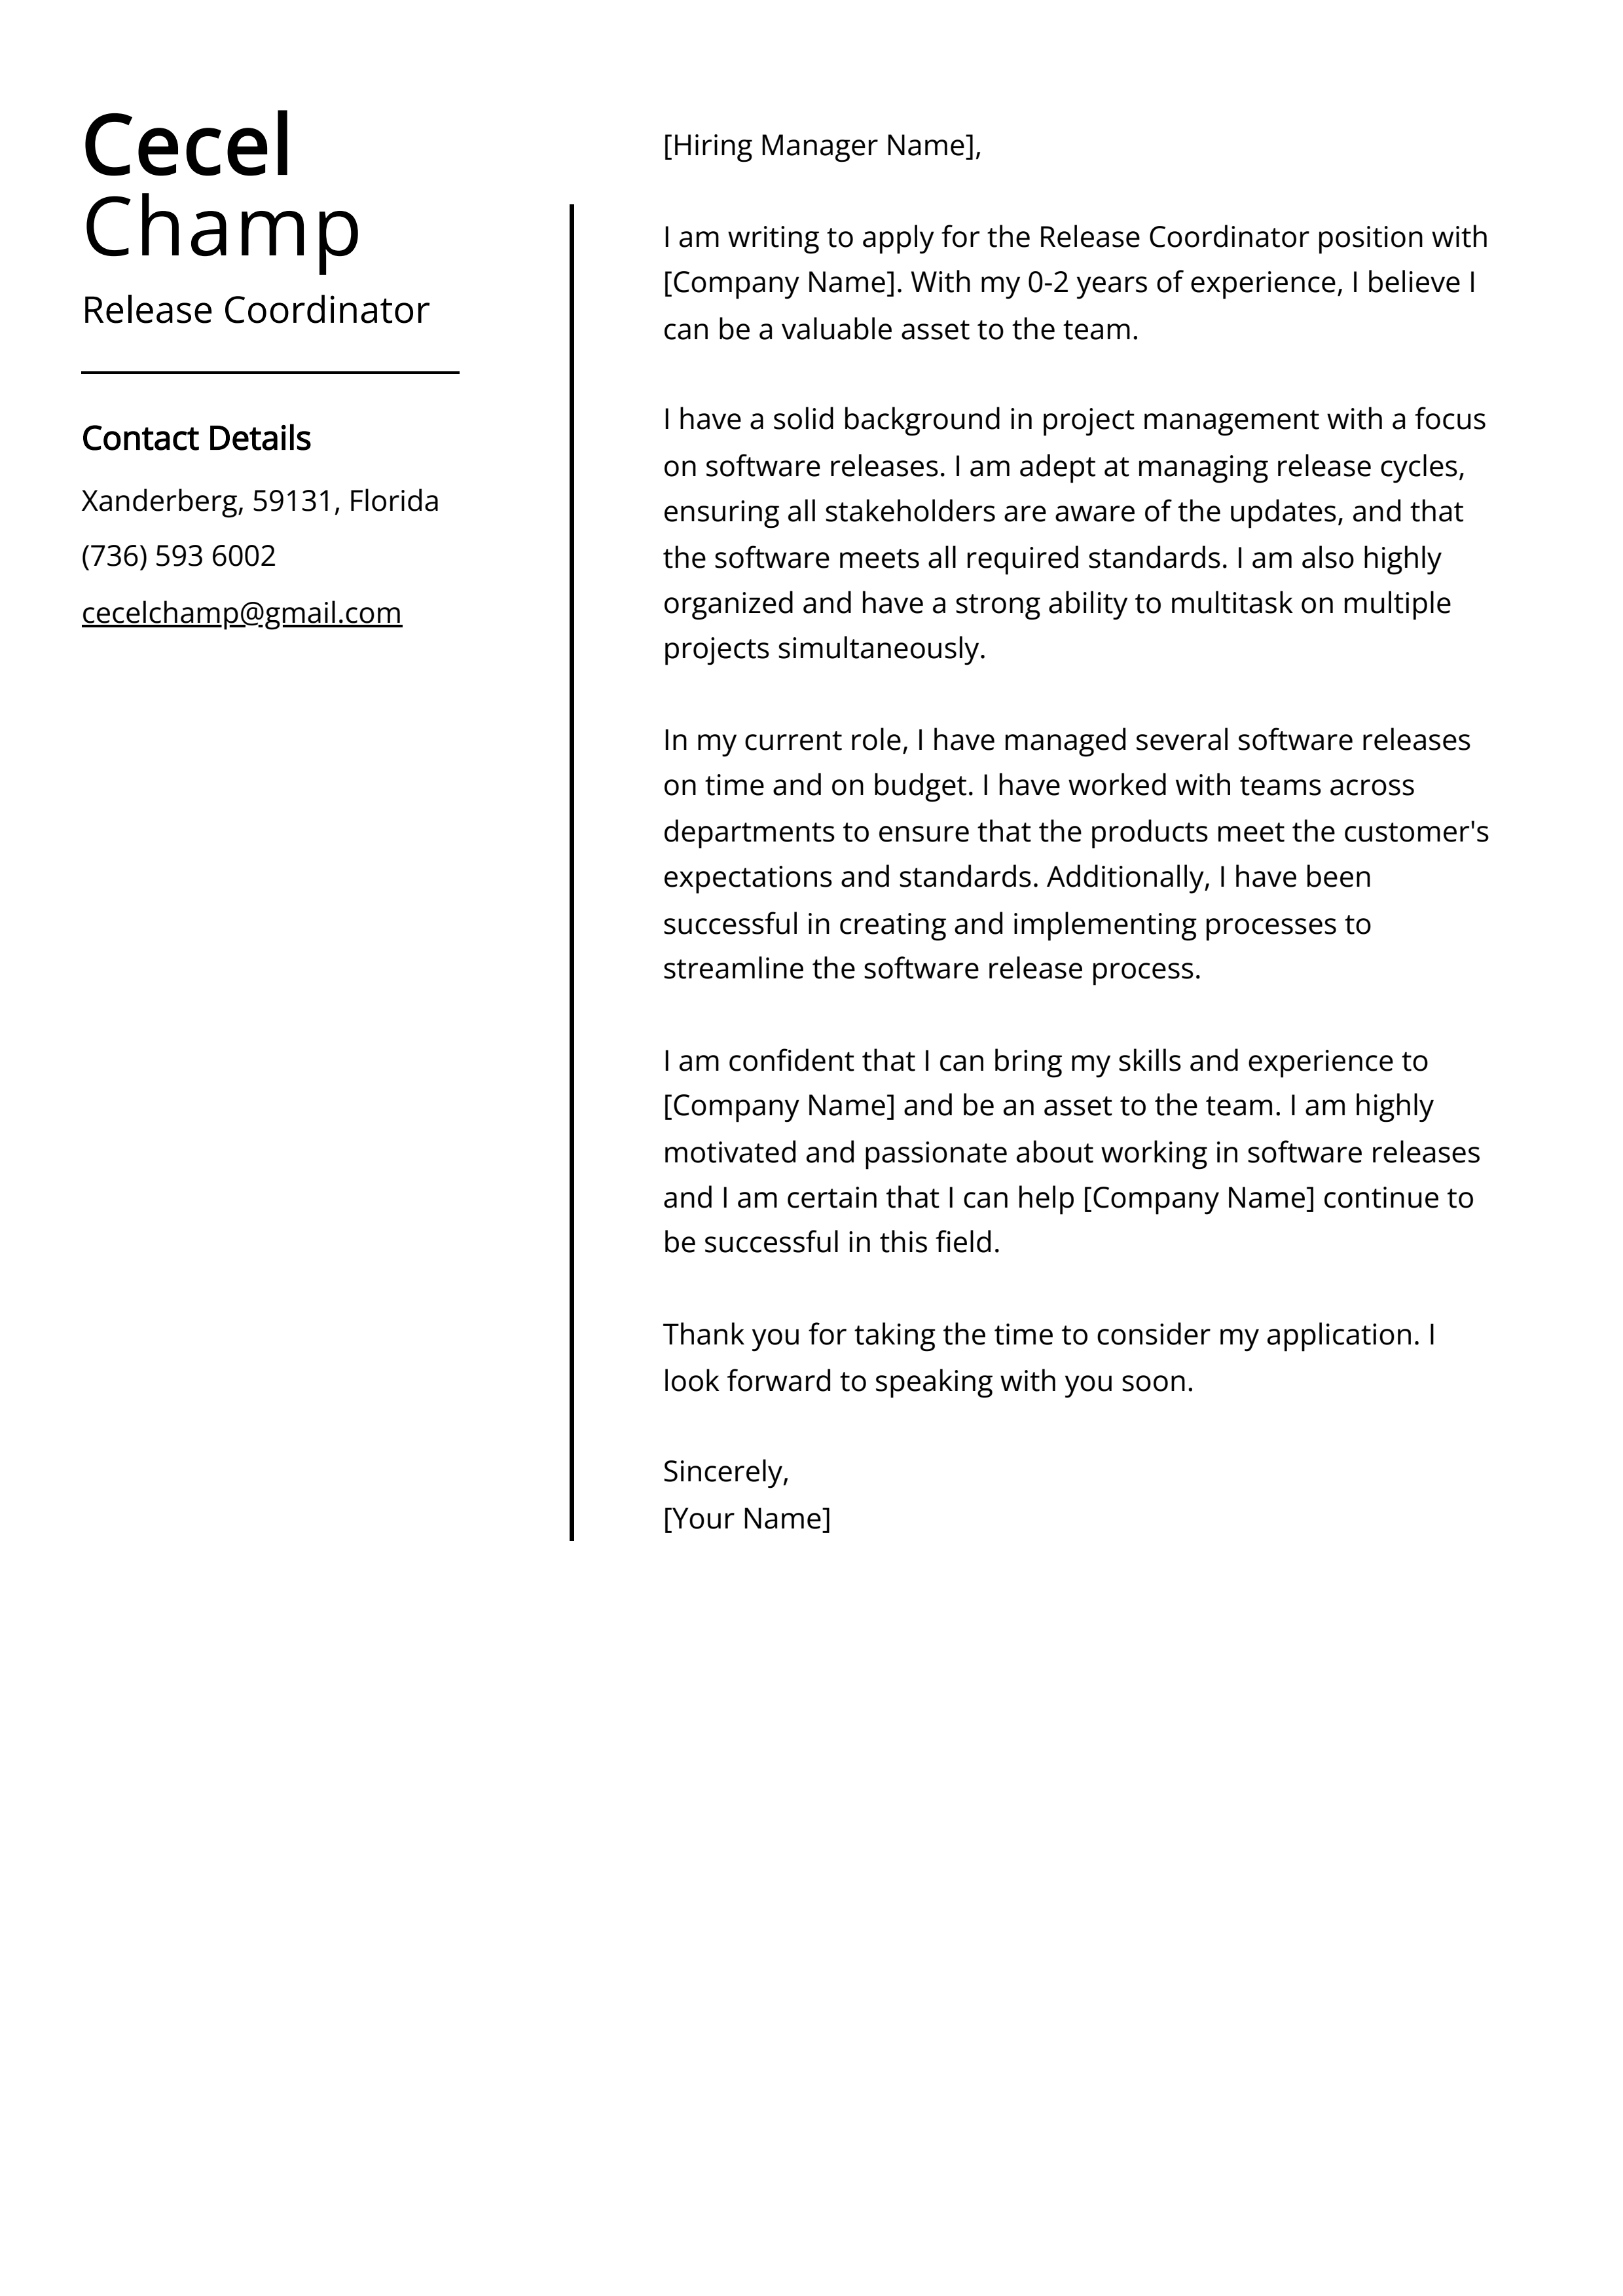 Release Coordinator Cover Letter Example